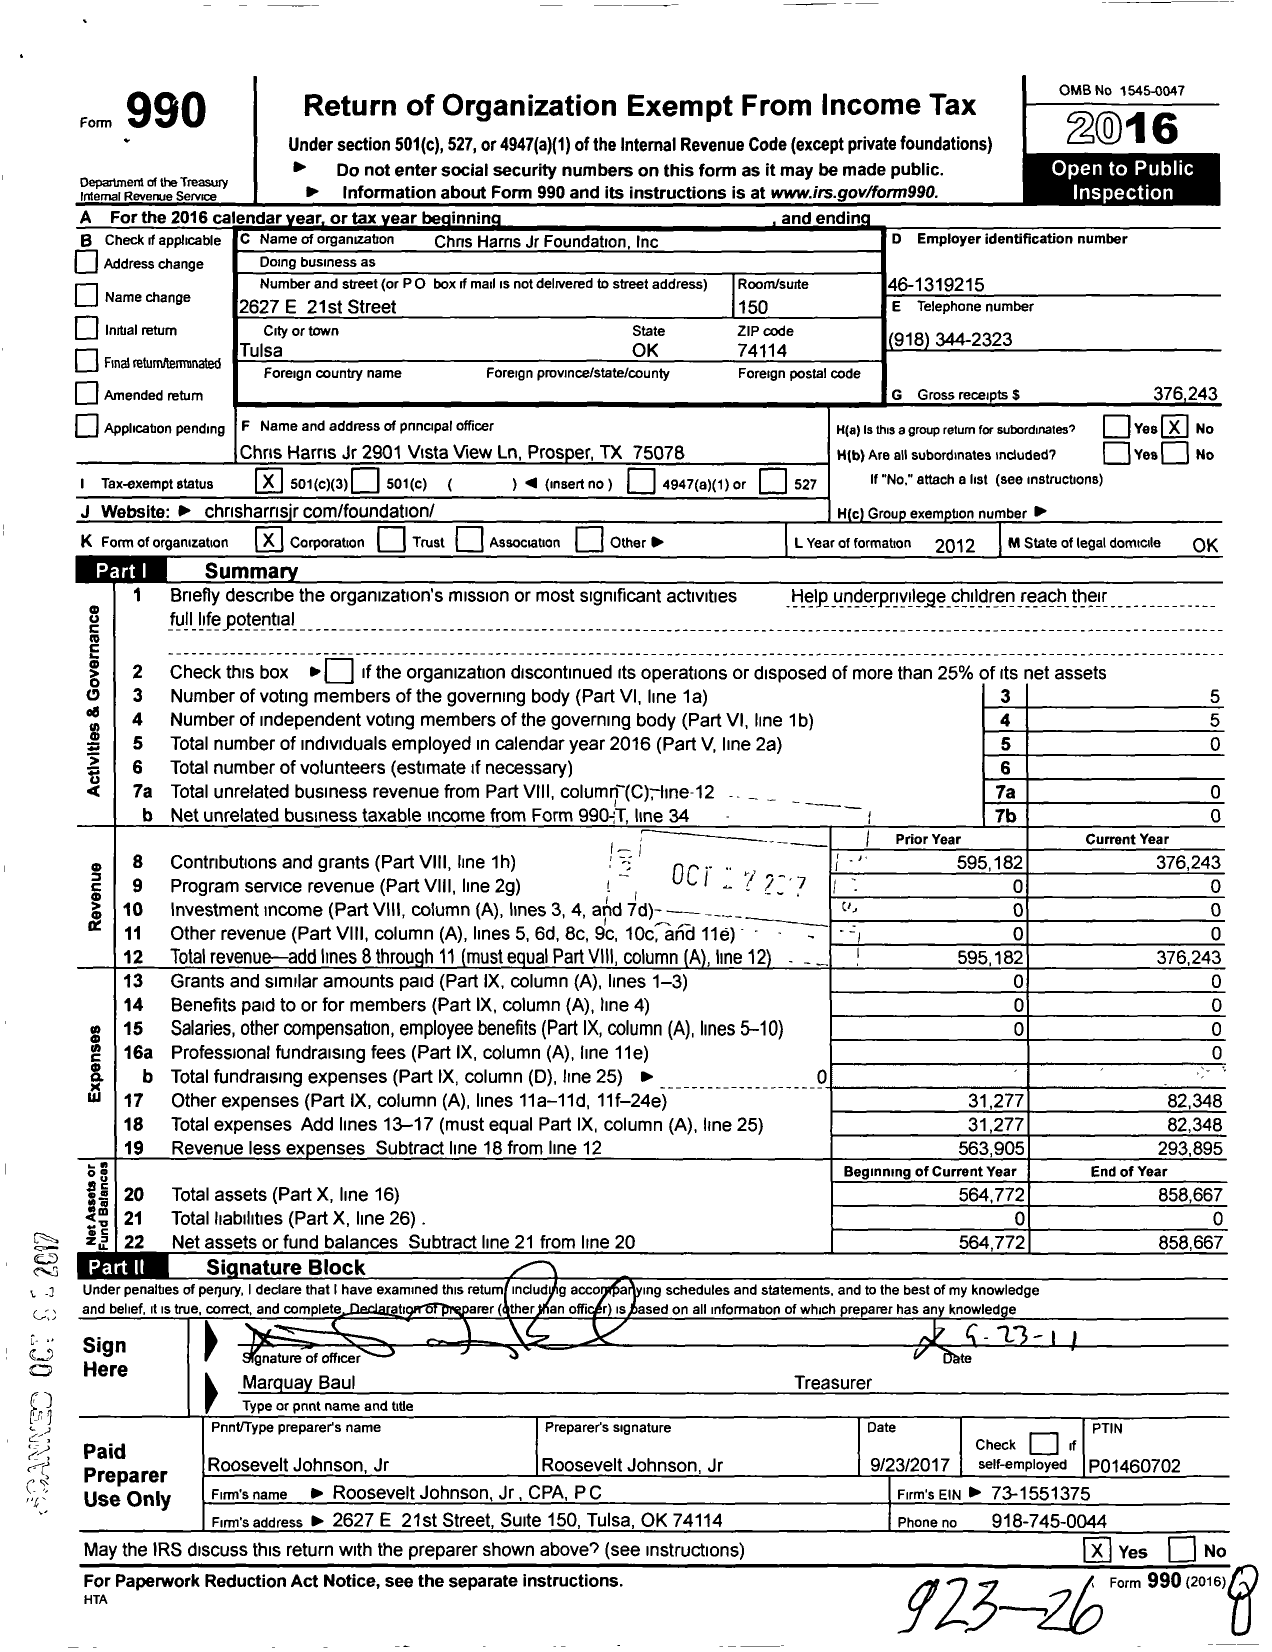 Image of first page of 2016 Form 990 for Chris Harris JR Foundation